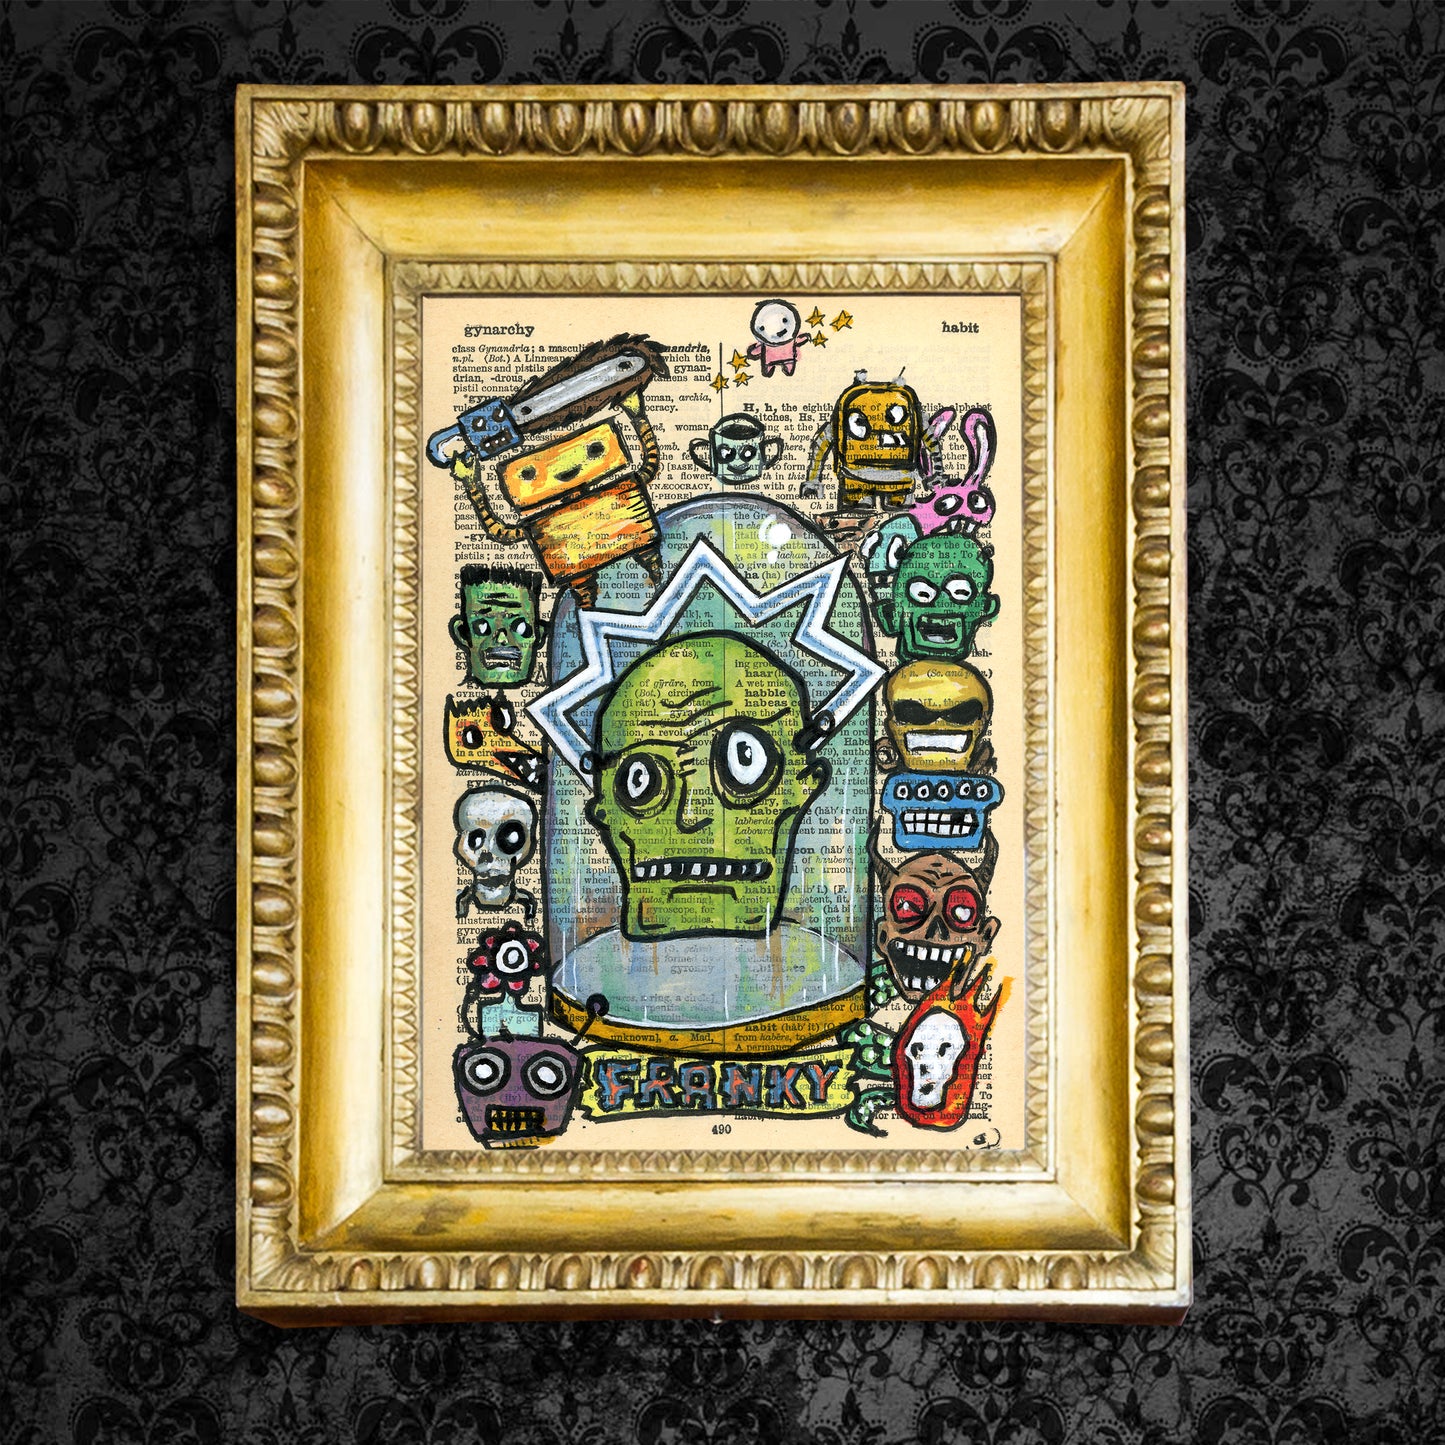 Whimsical "Franky" art with funny creatures on a vintage dictionary page, created with acrylics and markers.